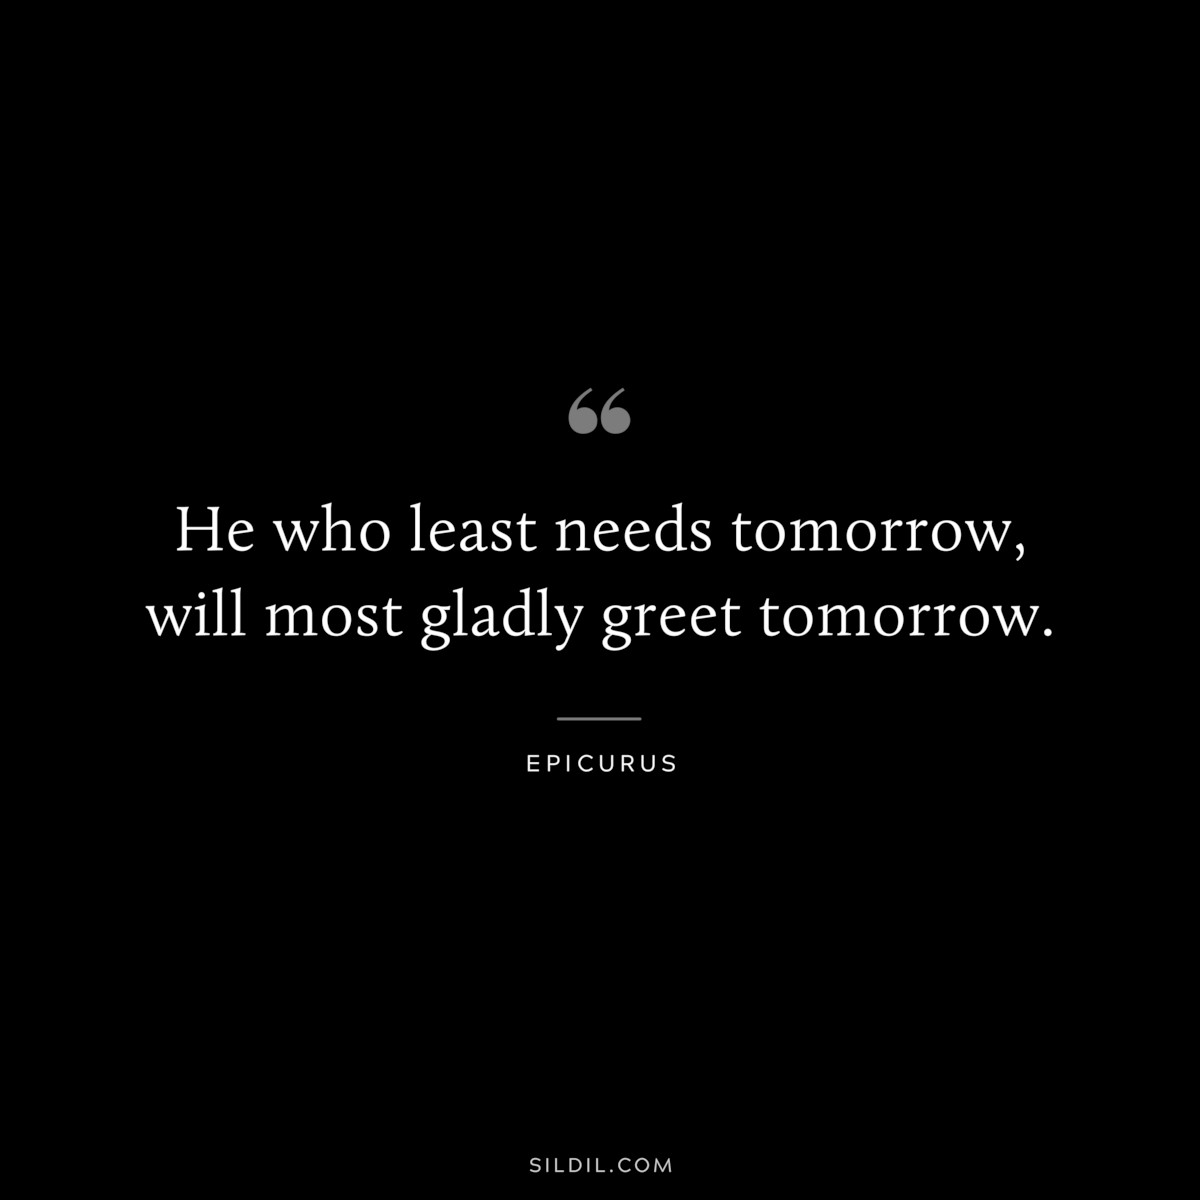 He who least needs tomorrow, will most gladly greet tomorrow. — Epicurus